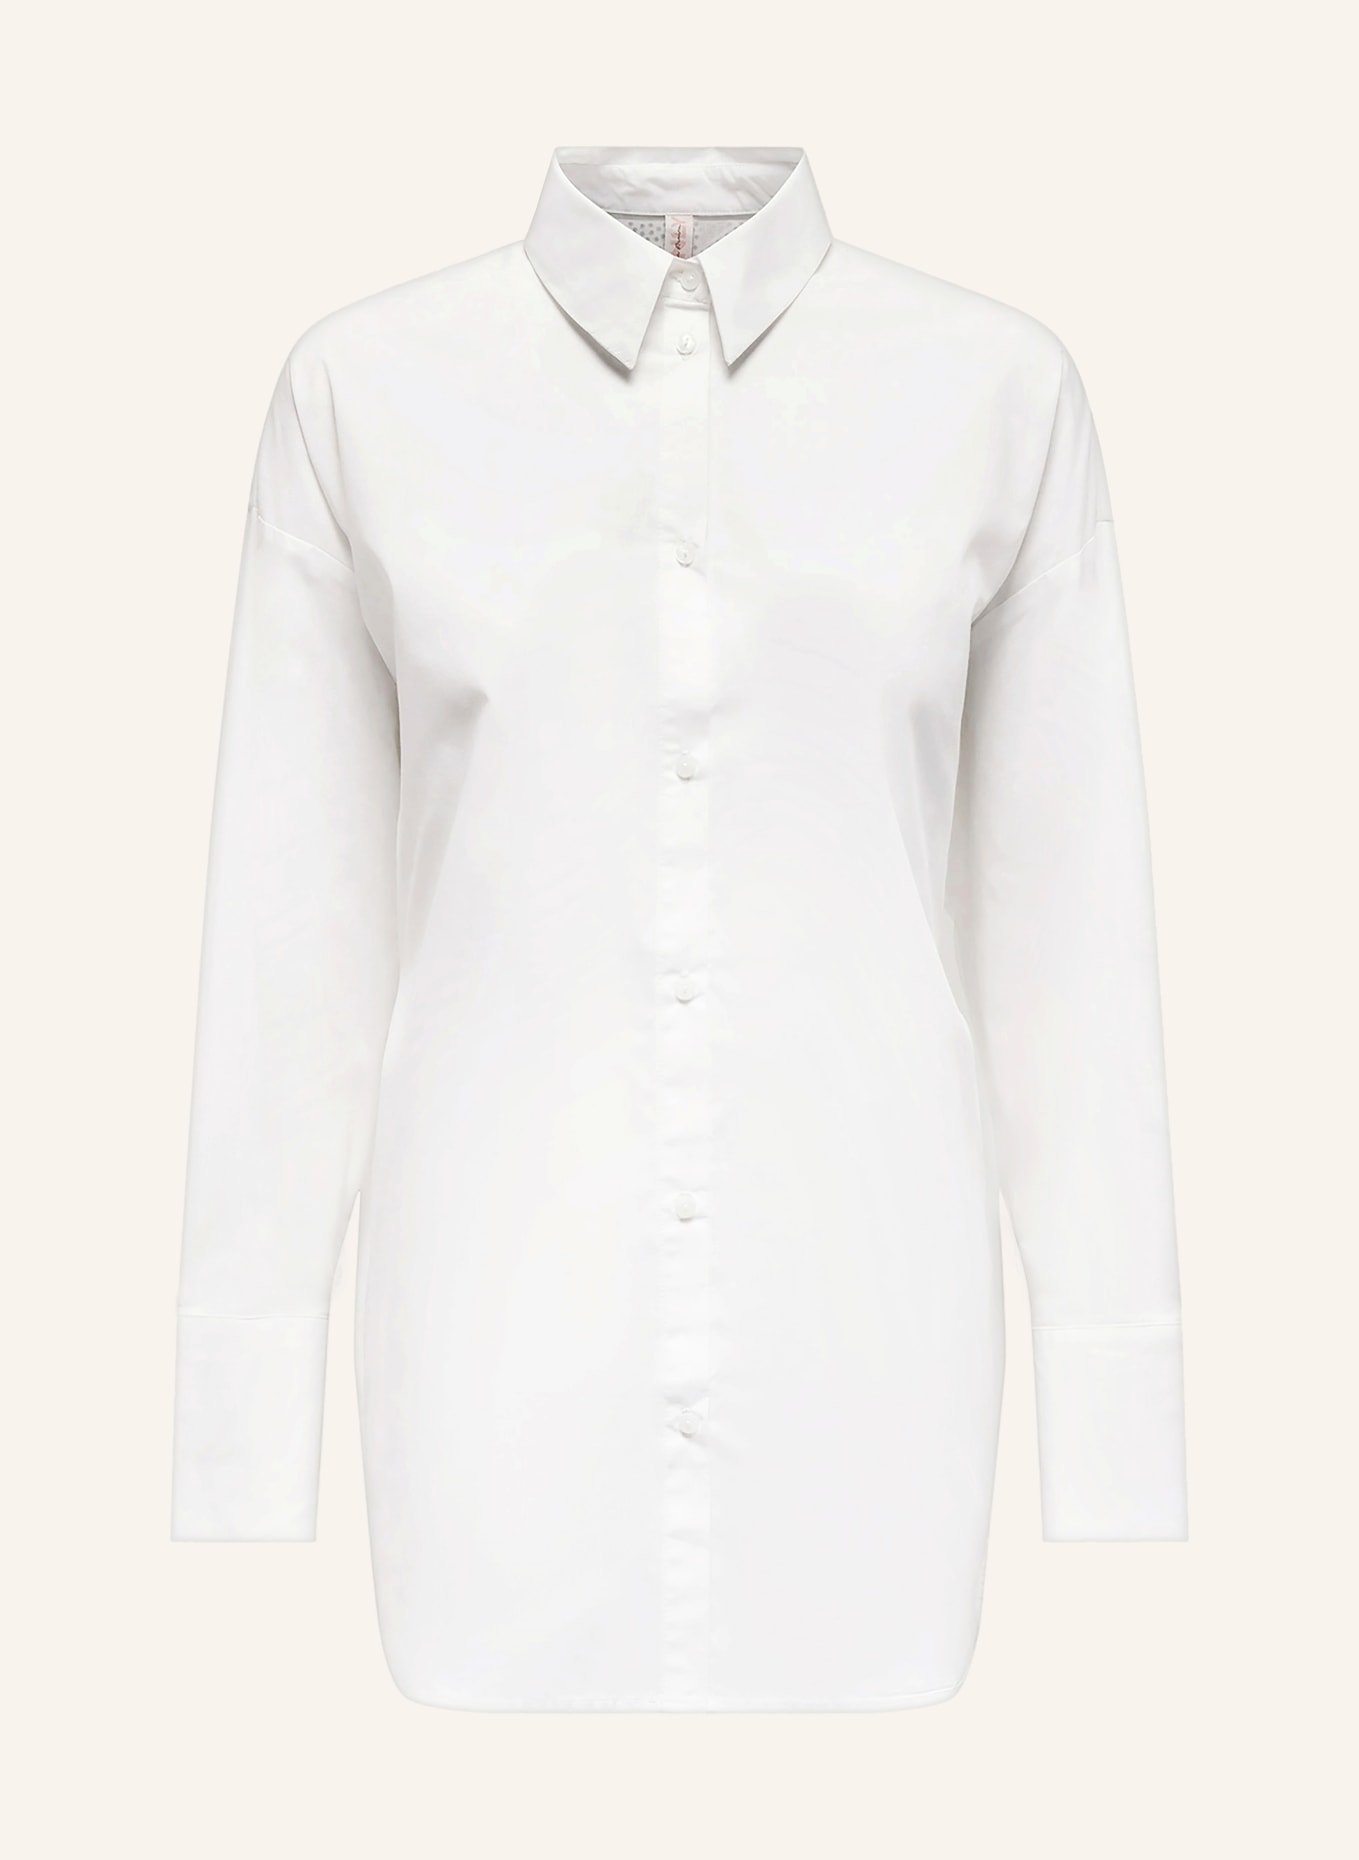 ONLY Shirt blouse with decorative gems, Color: WHITE/ SILVER (Image 1)